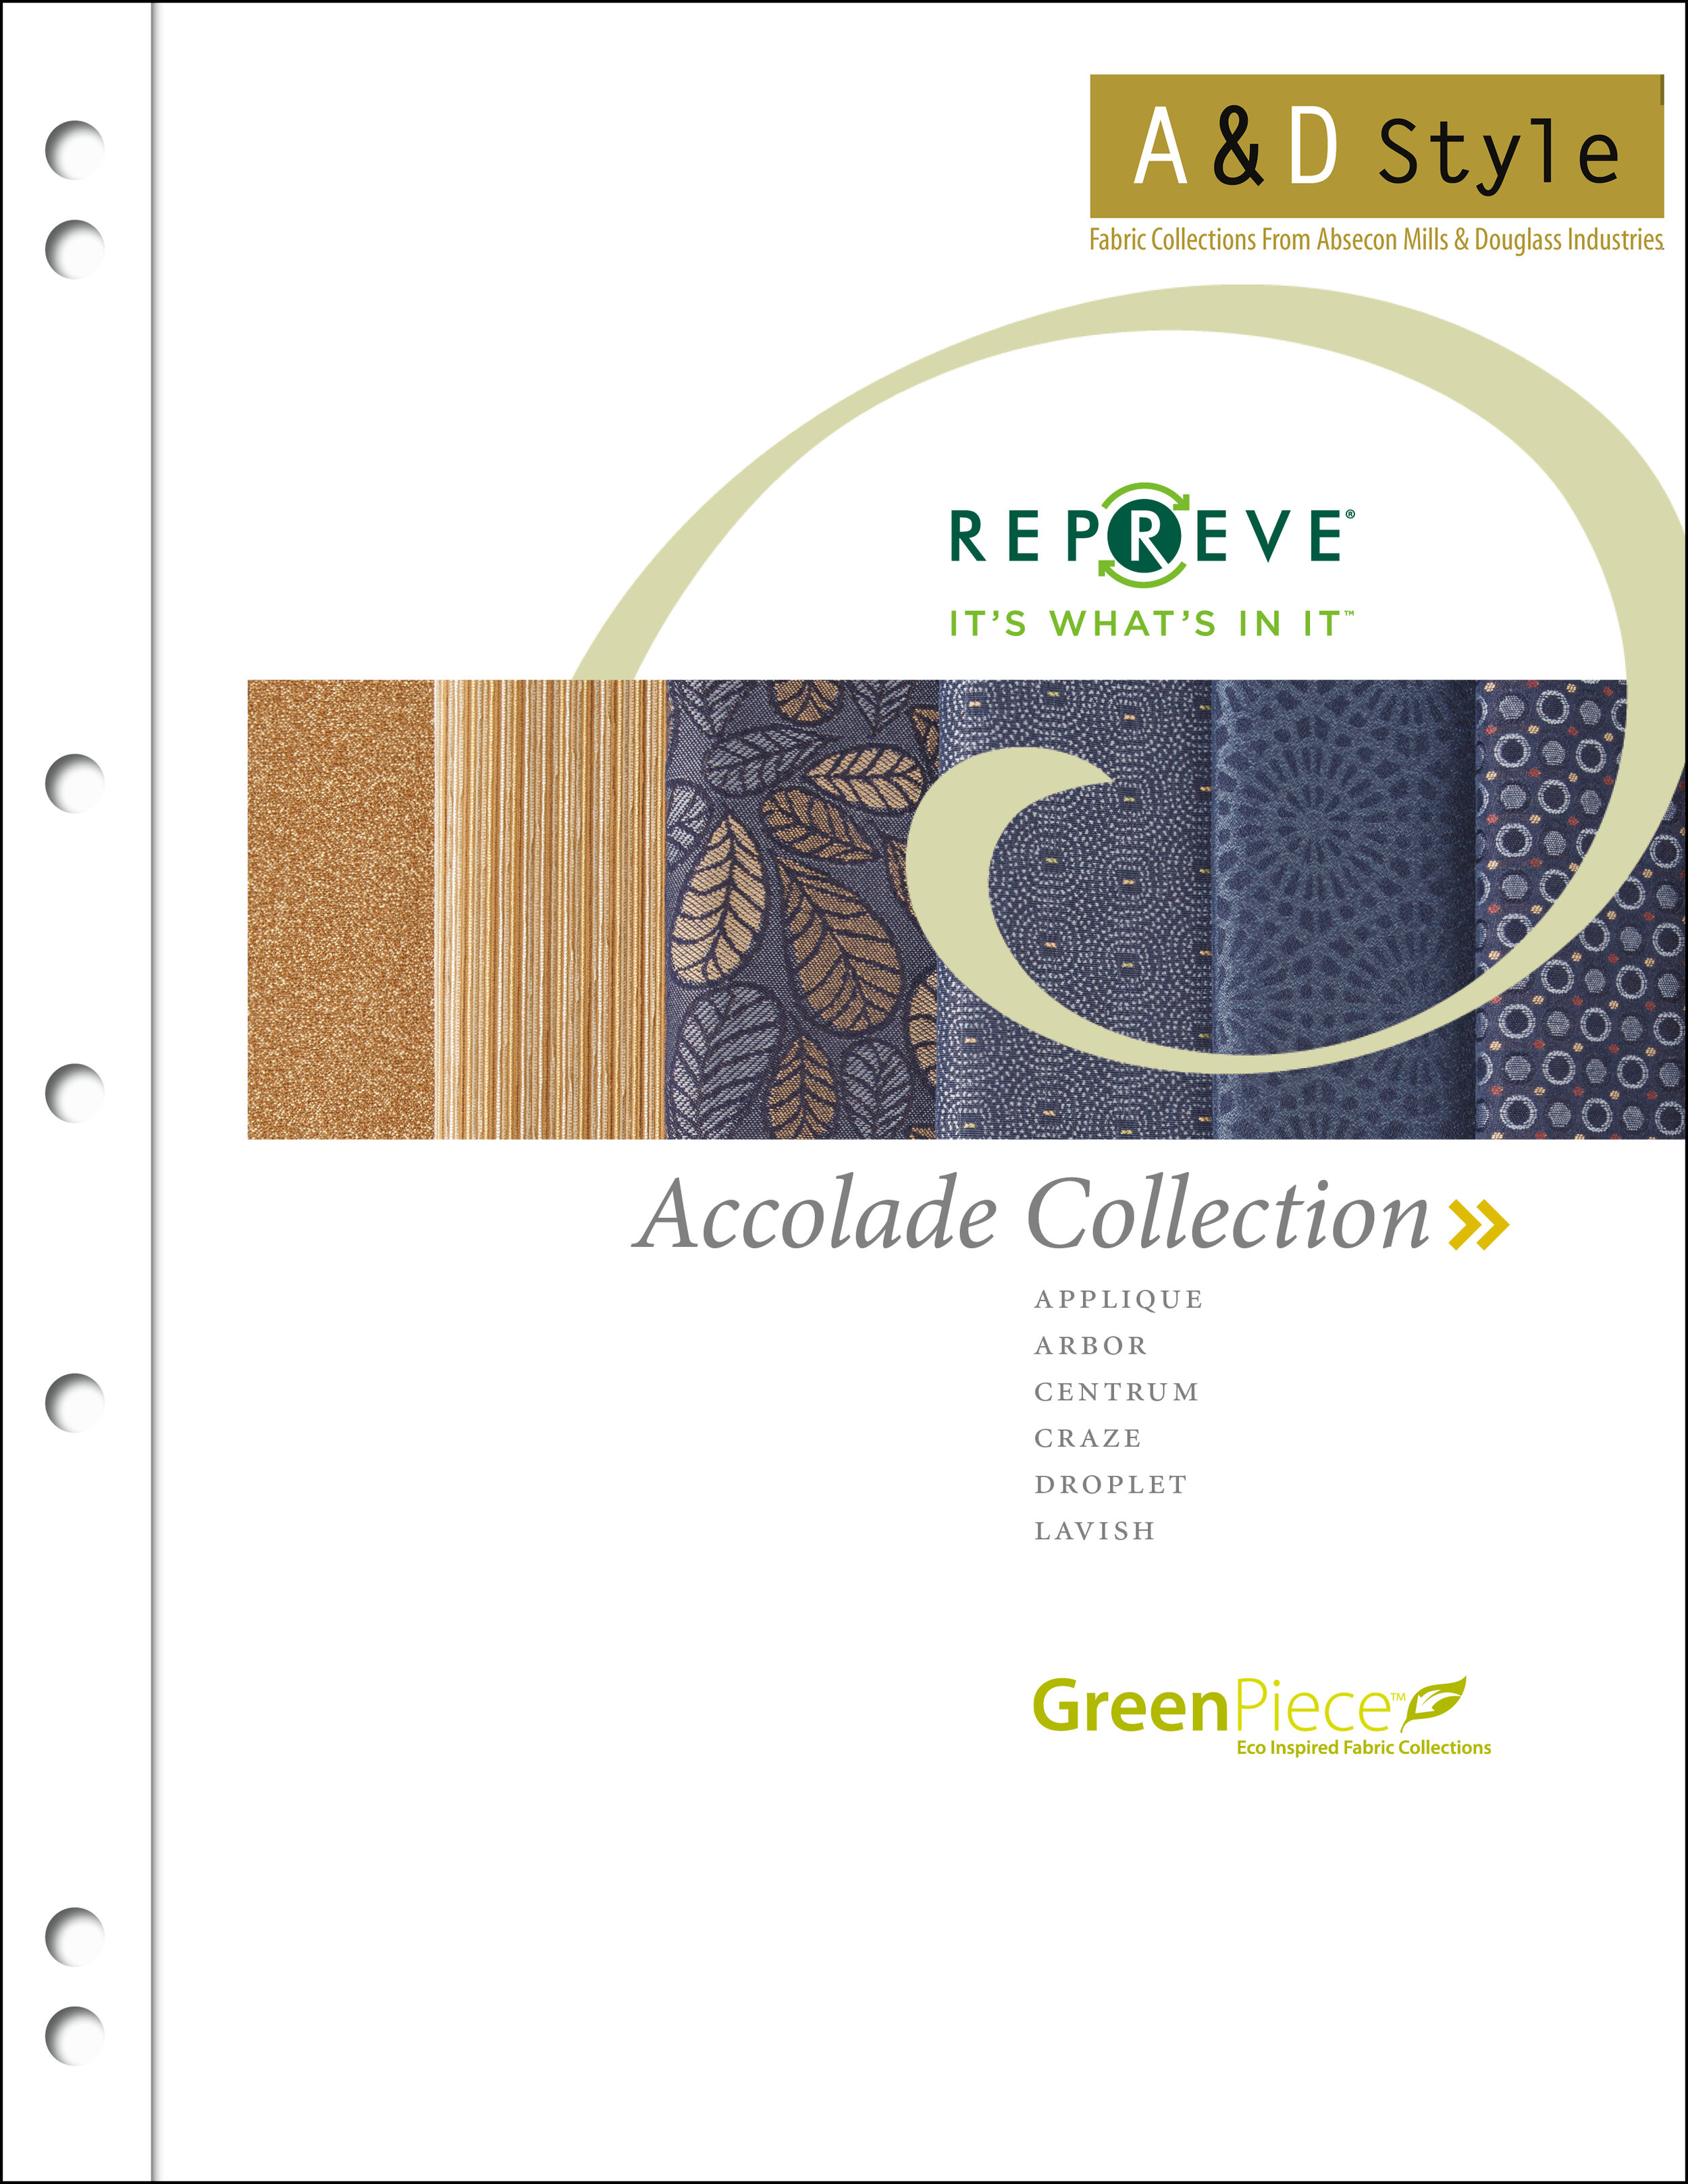 Accolade Collection Cover Image.jpg